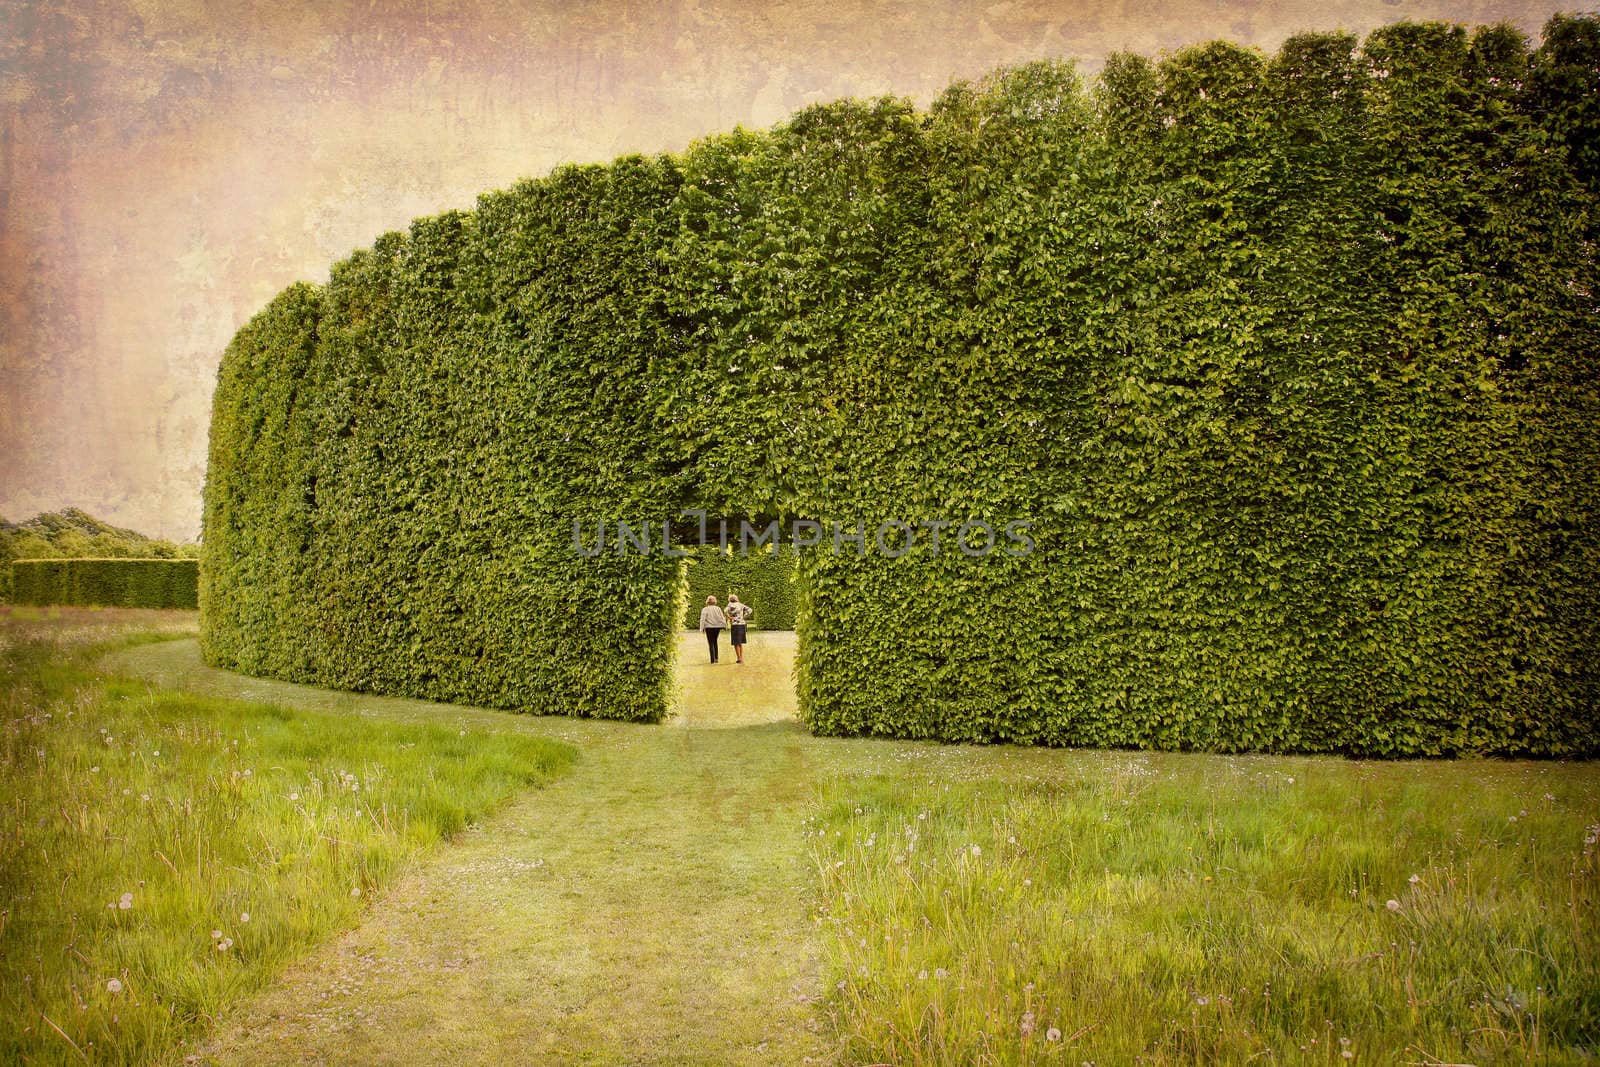 Artistic work of my own in retro style - Postcard from Denmark. - High hedges.